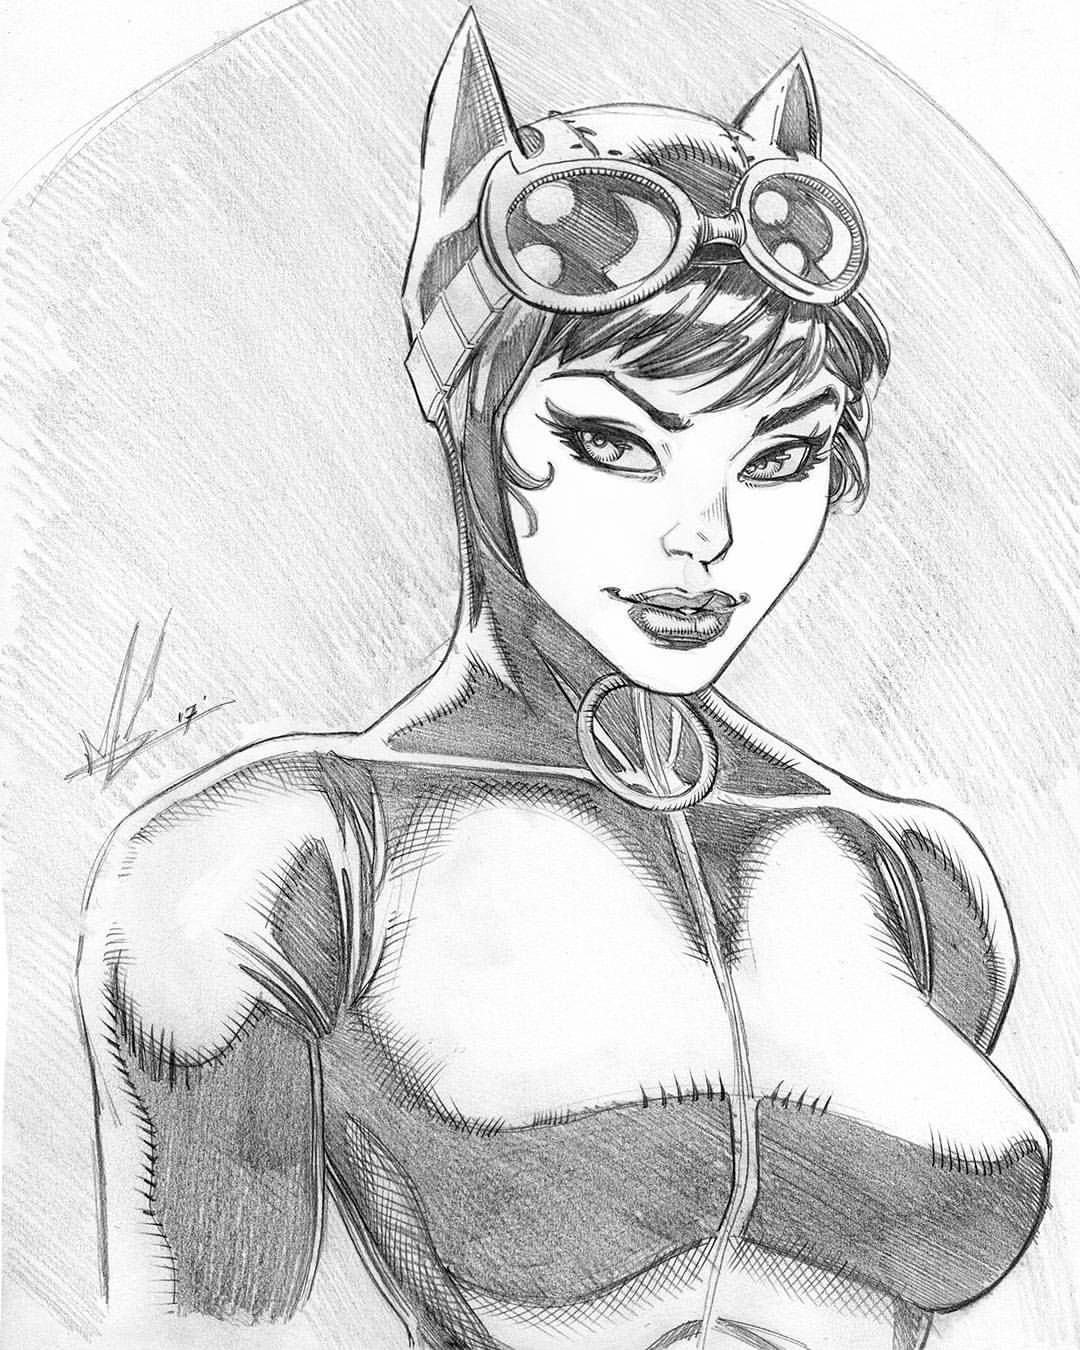 Super Hero Drawing At Getdrawings  Free Download serapportantà Catwoman Dessin